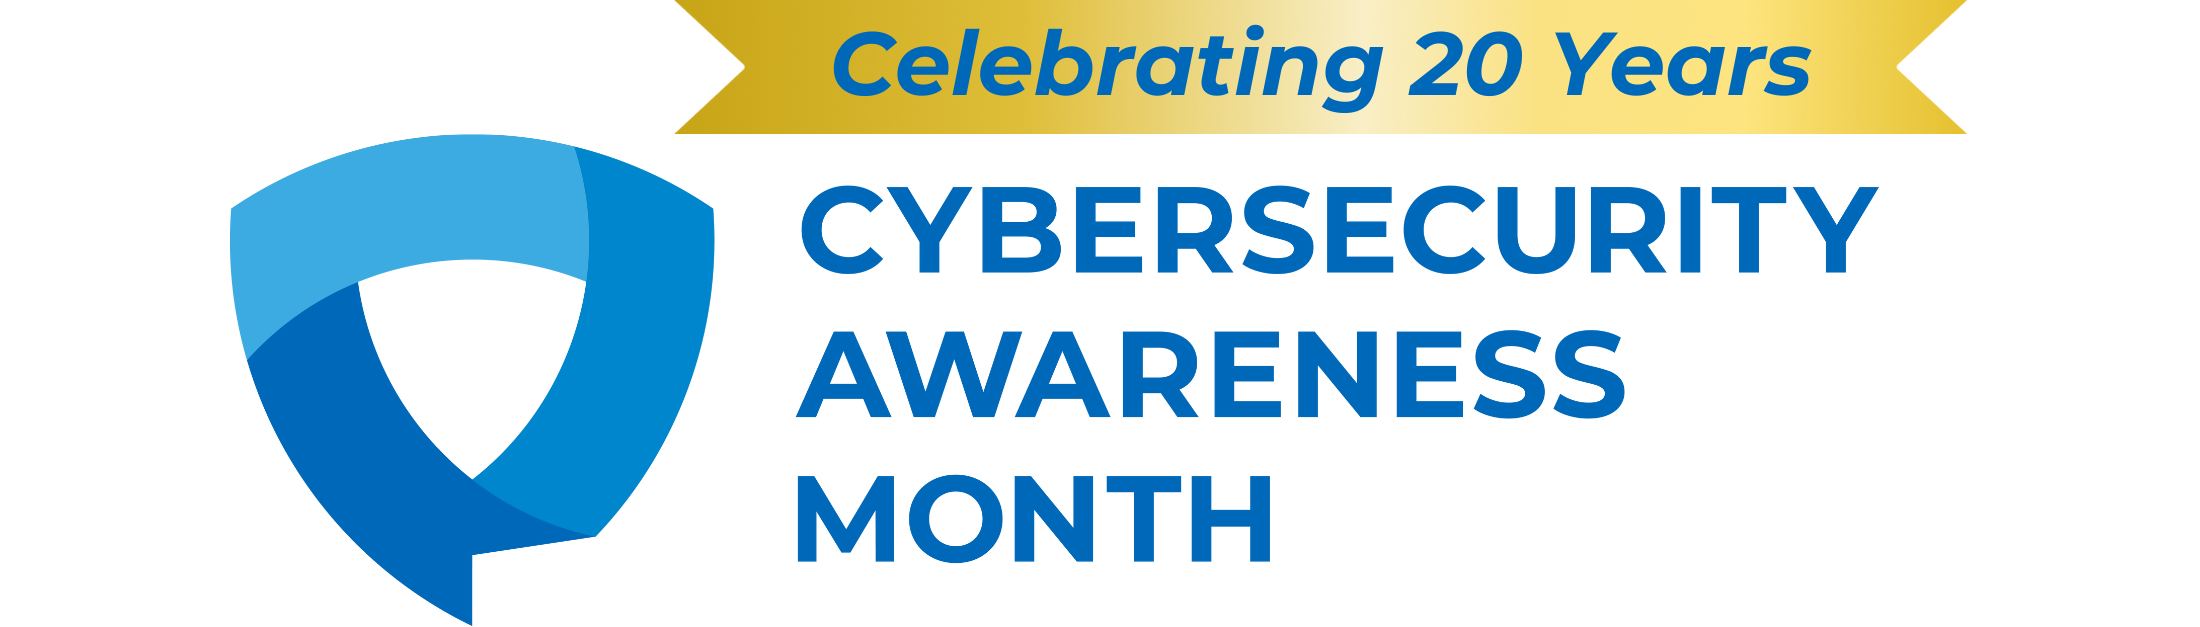 Celebrating 20 Years of Cybersecurity Awareness Month